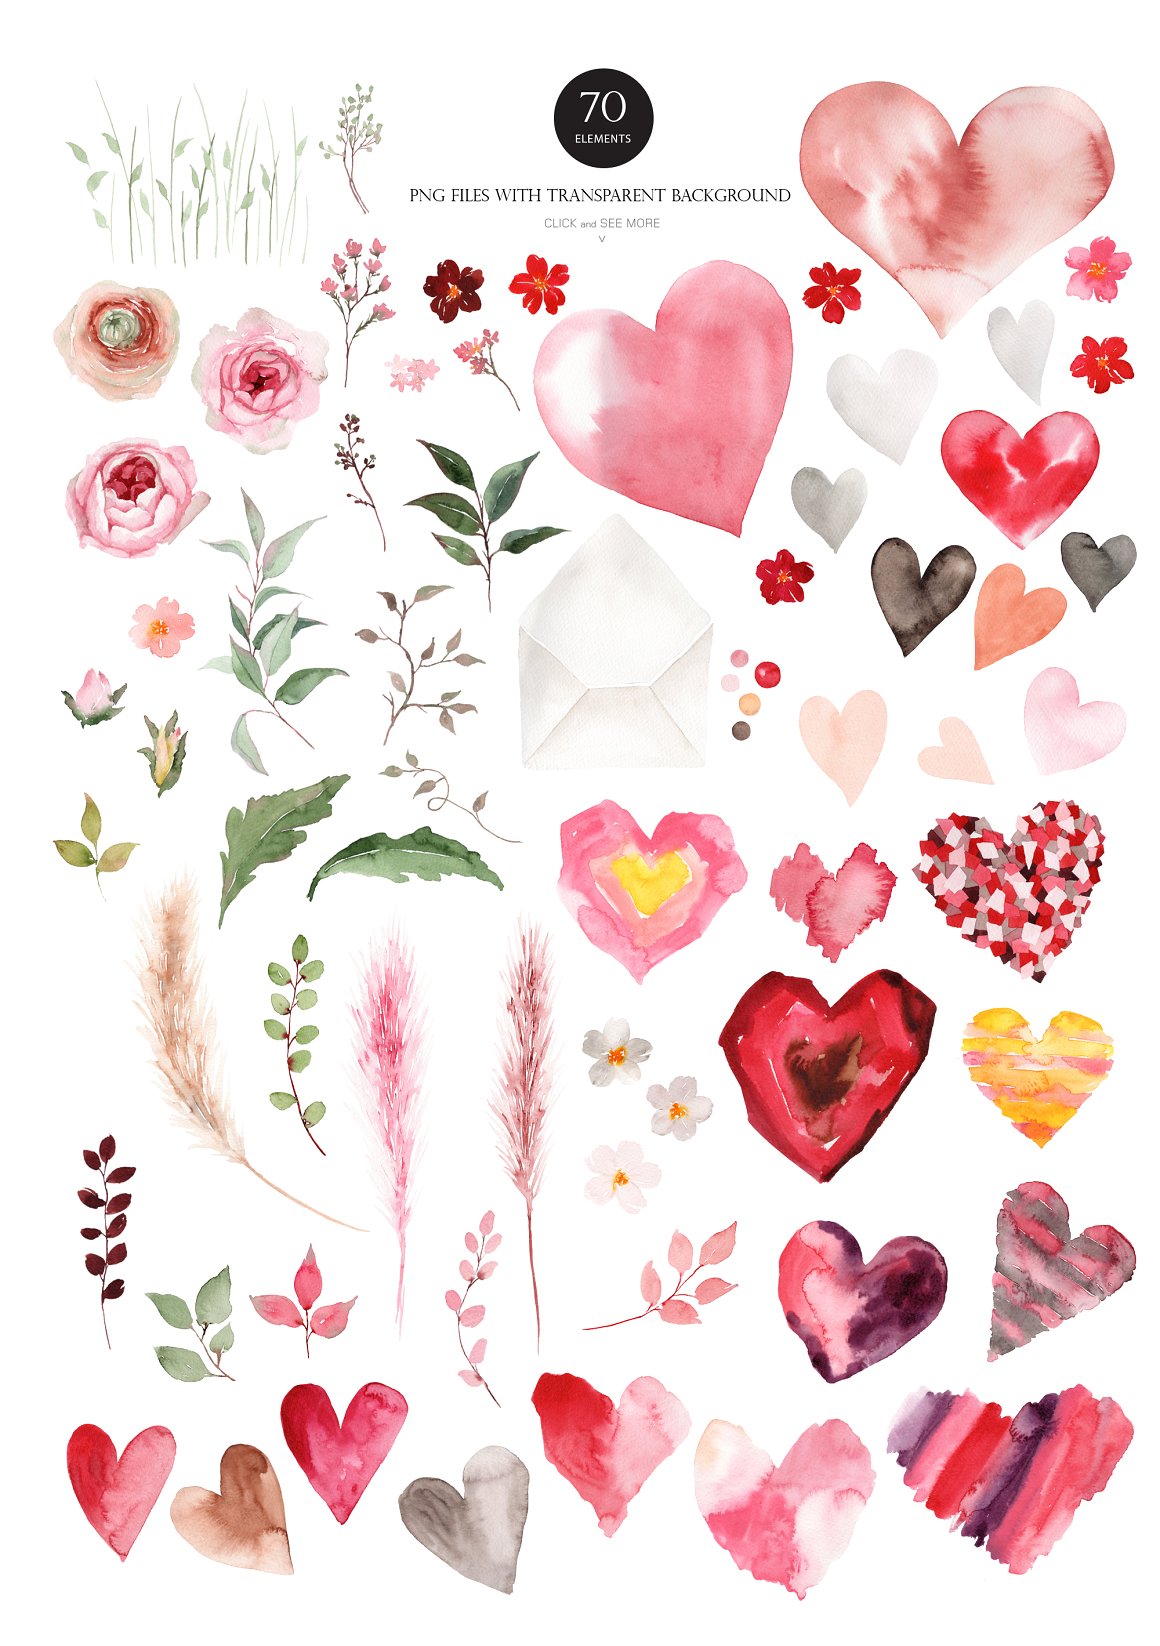 A set of 70 different watercolor valentine's elements on a white background.